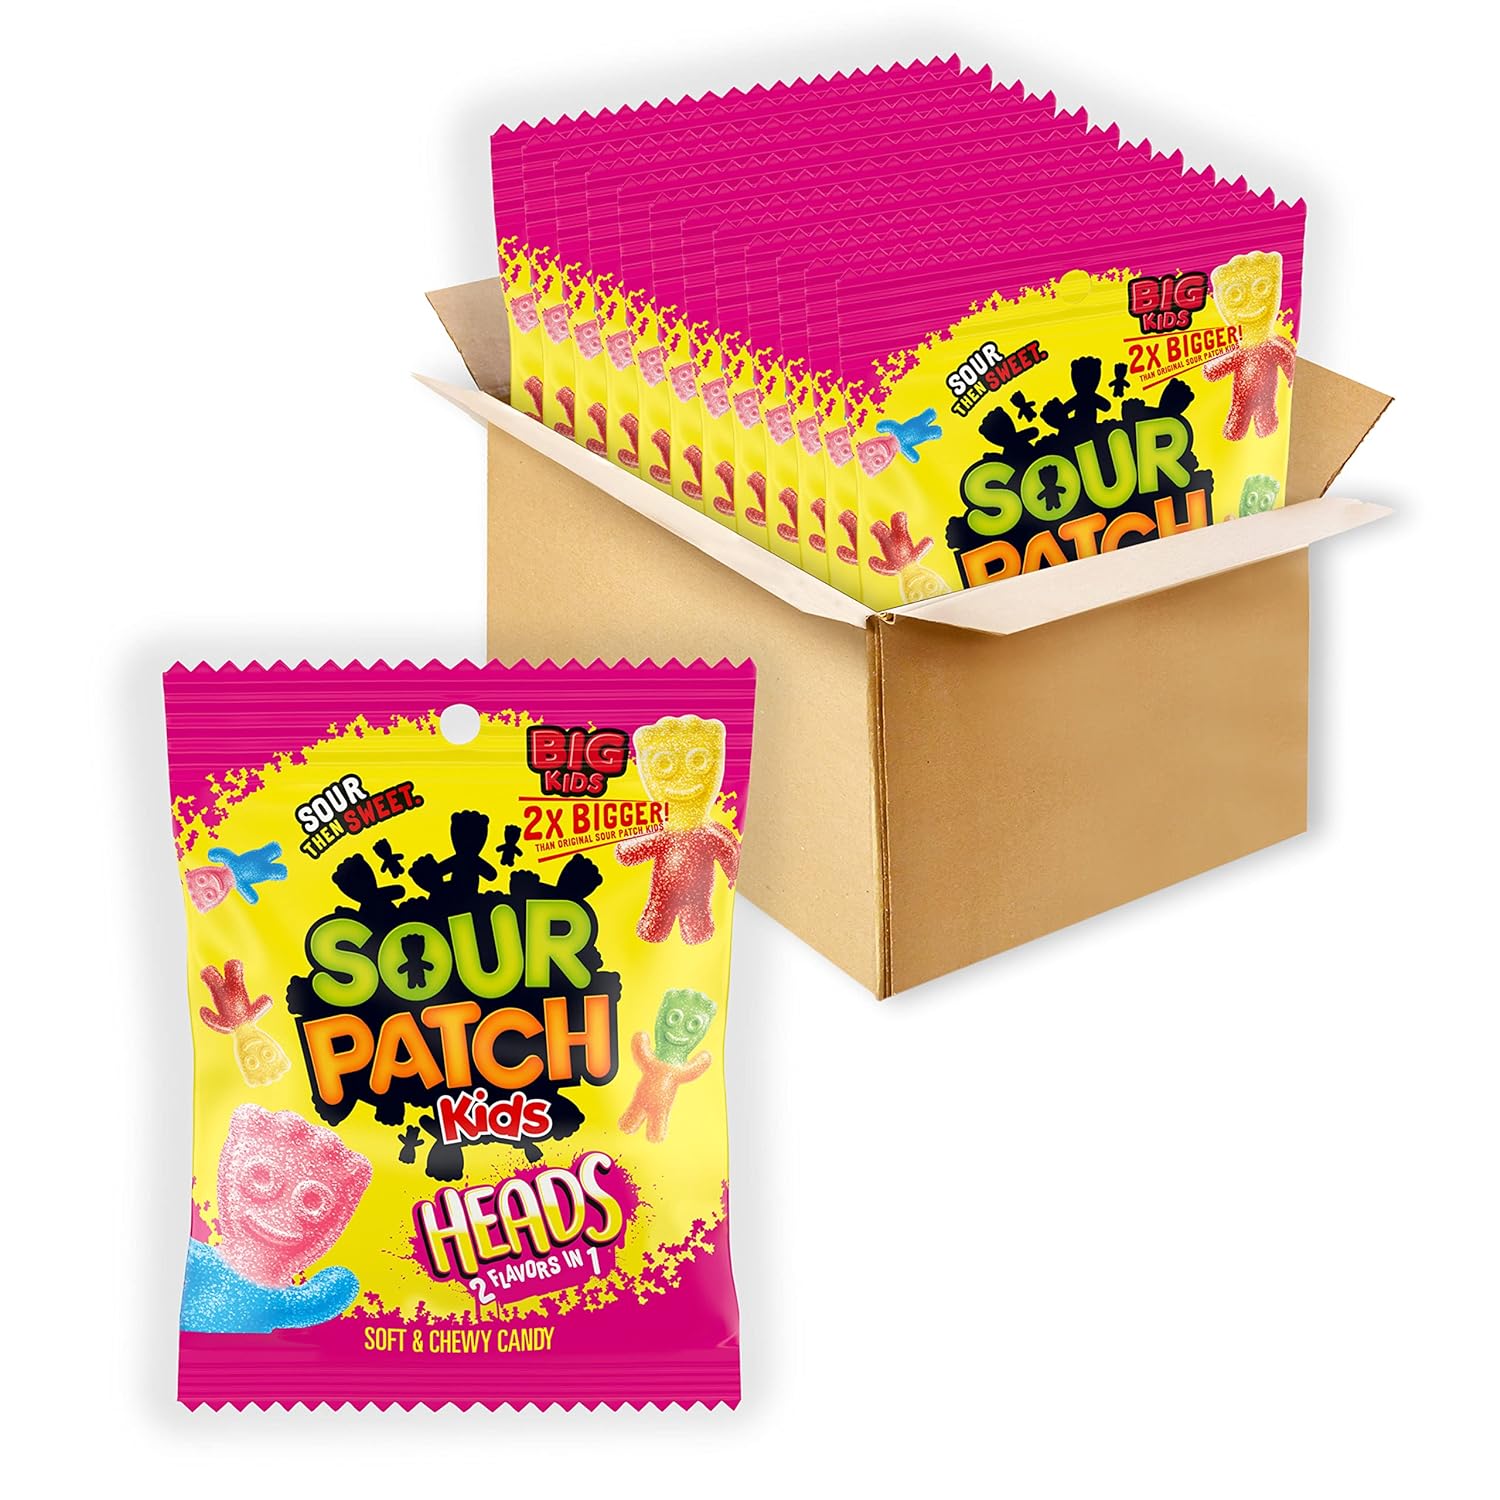 SOUR PATCH KIDS Heads 2 Flavors in 1 Soft & Chewy Candy, 12 - 5 oz Bags